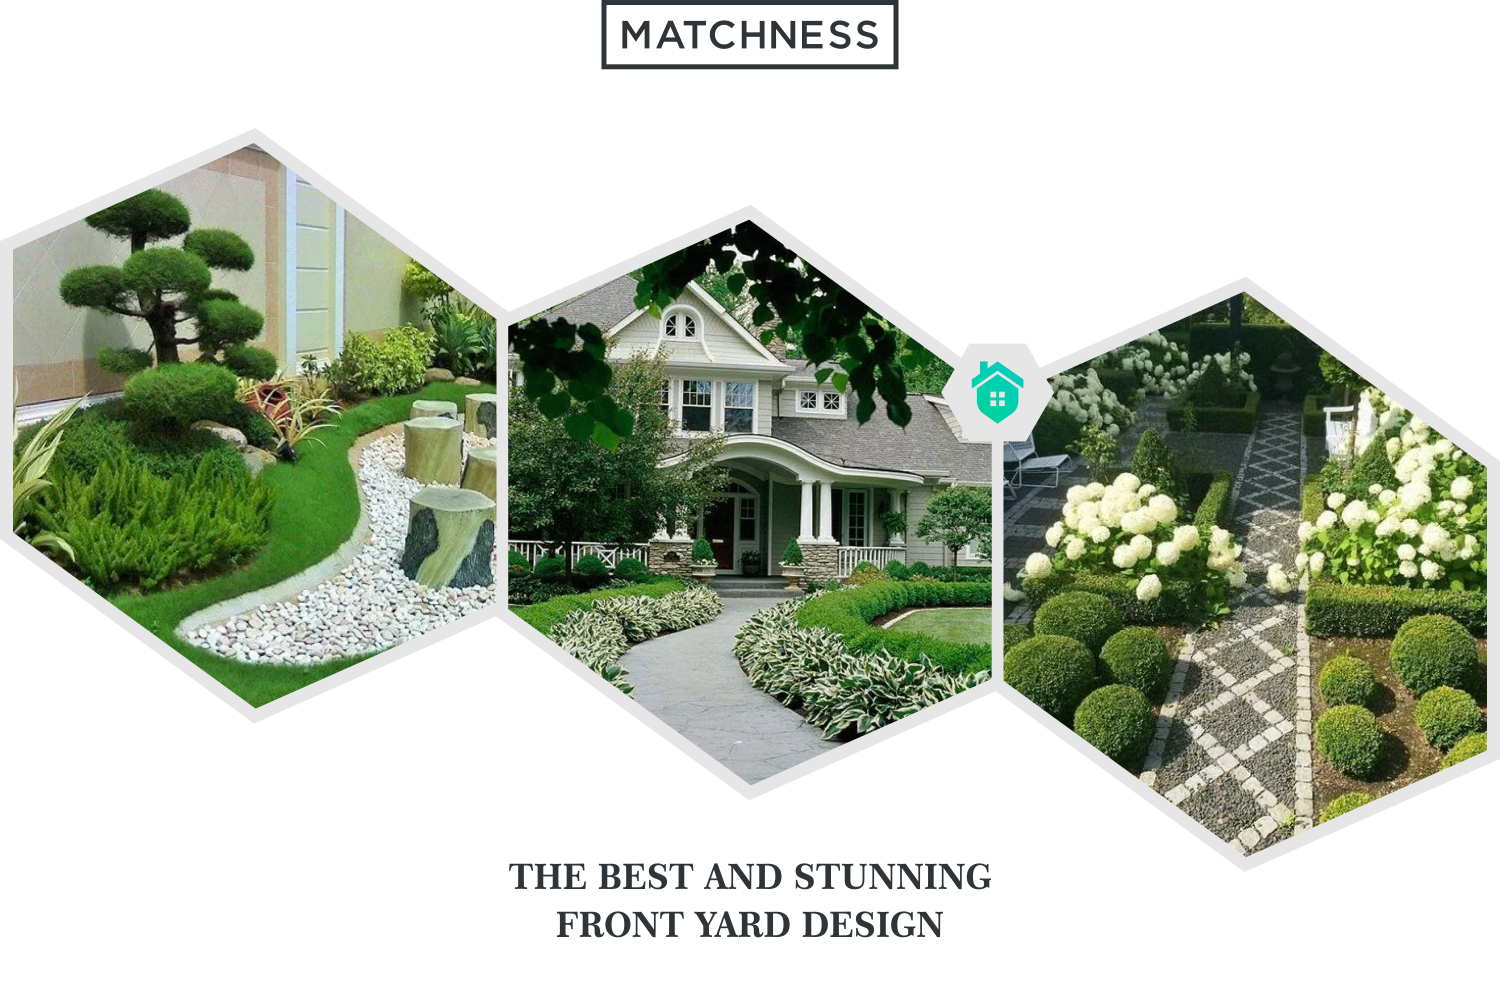 47 The Best And Stunning Front Yard Design ~ Matchness.com